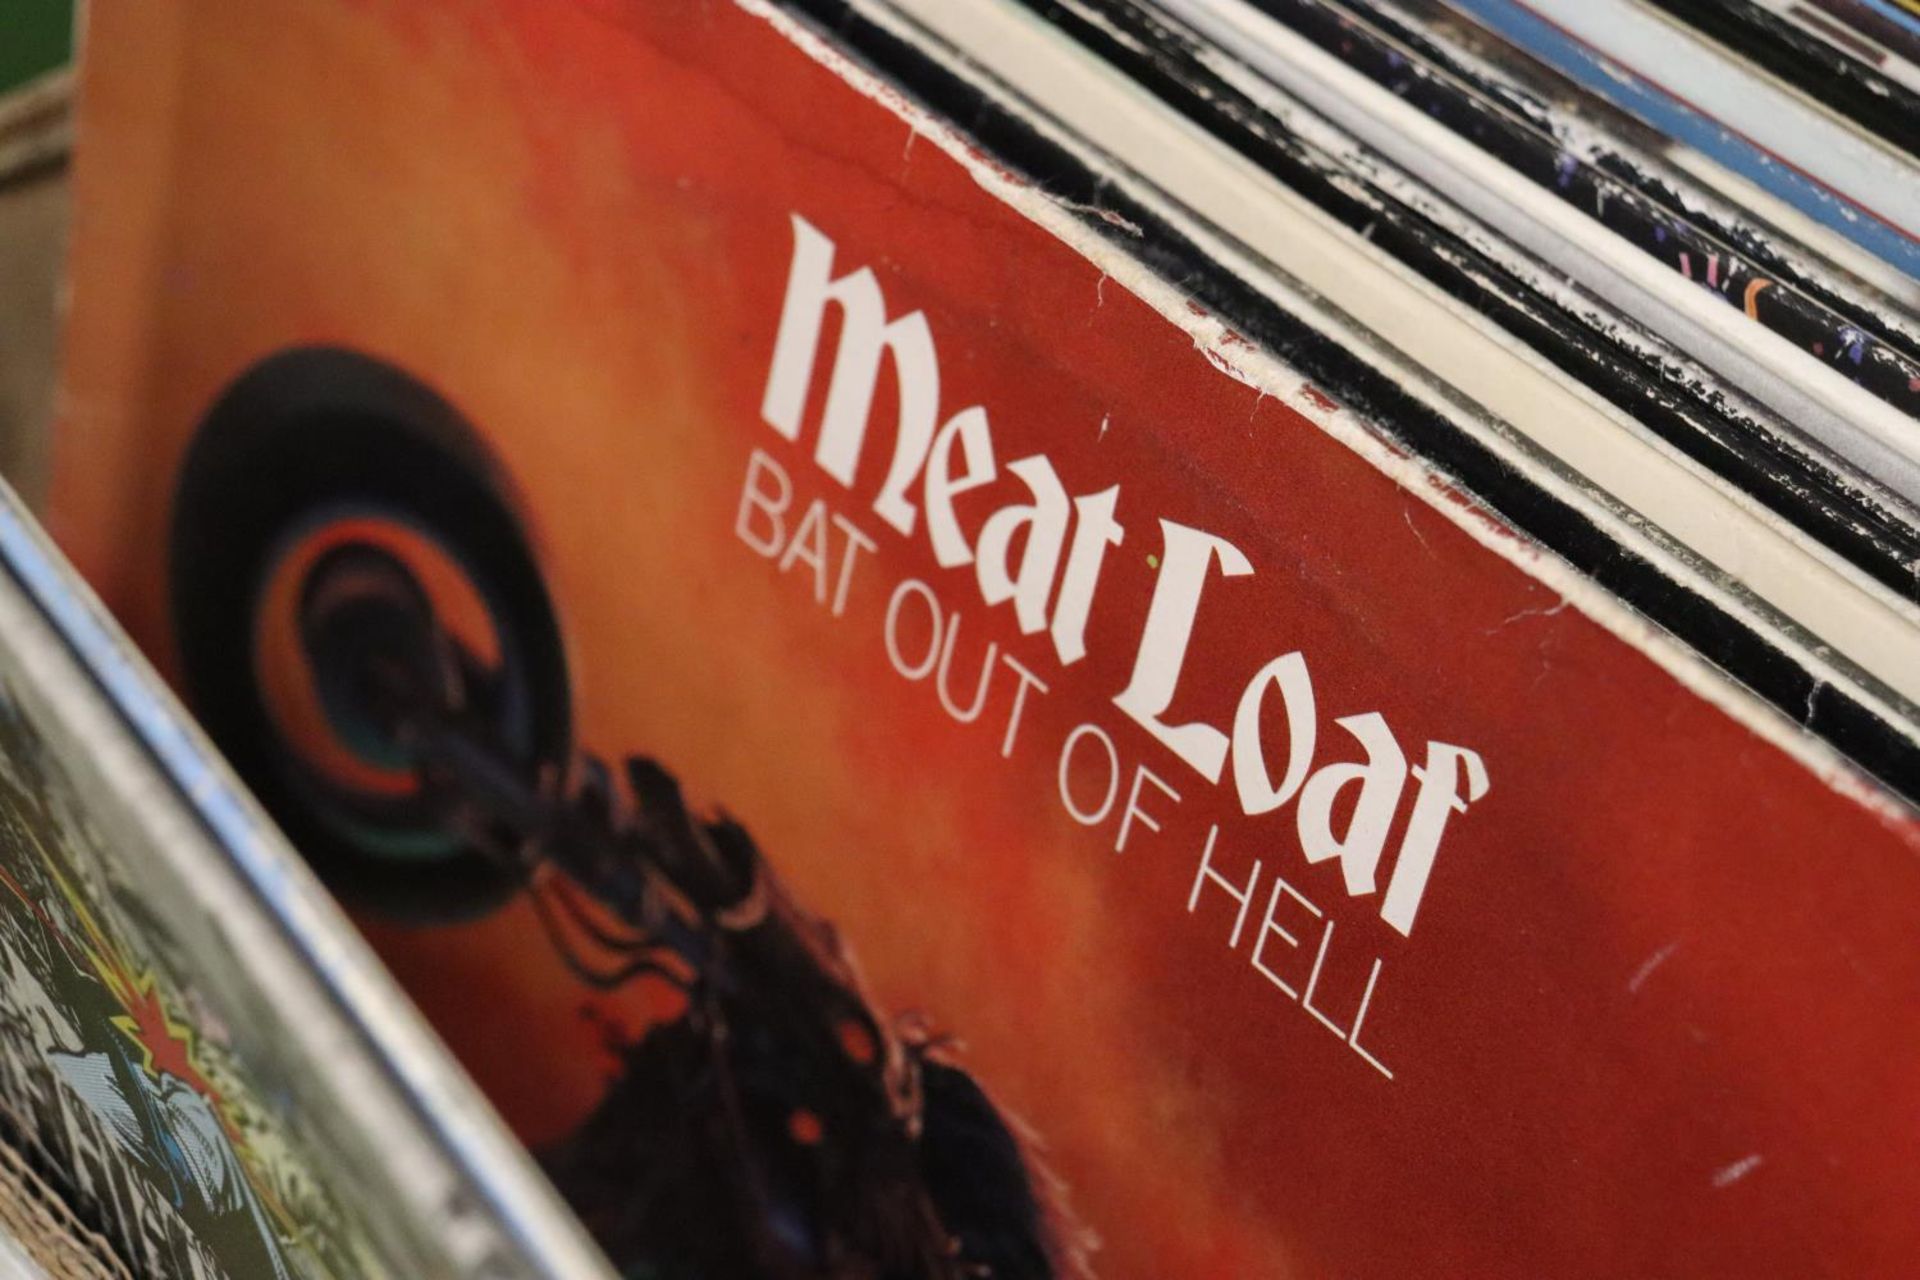 A LARGE COLLECTION OF VINYL LP RECORDS TO INCLUDE MEAT LOAF, SUPERTRAMP, THE WAR OF THE WORLDS, - Image 3 of 7